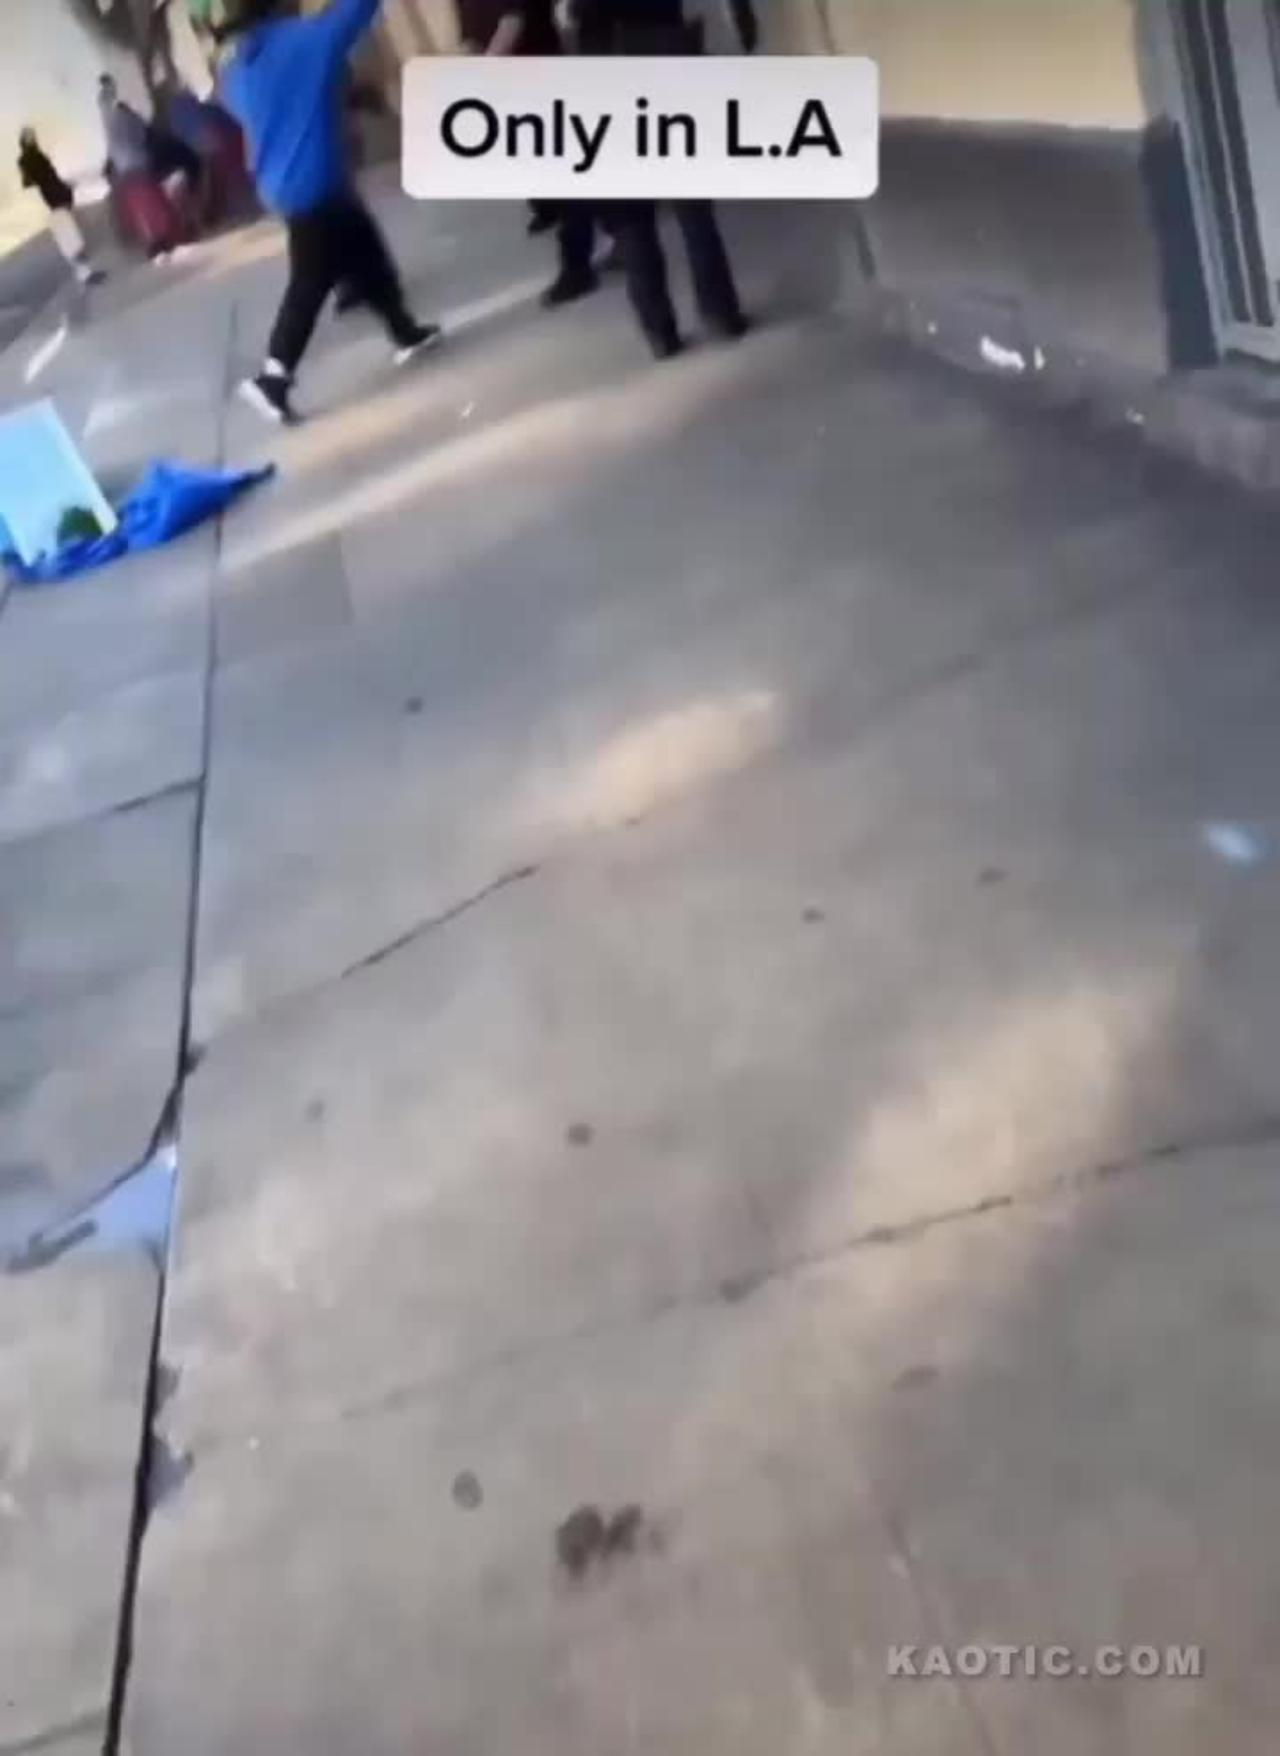 Man Gets Into The Fist Fight With Two LAPD Cops, Gets Tased